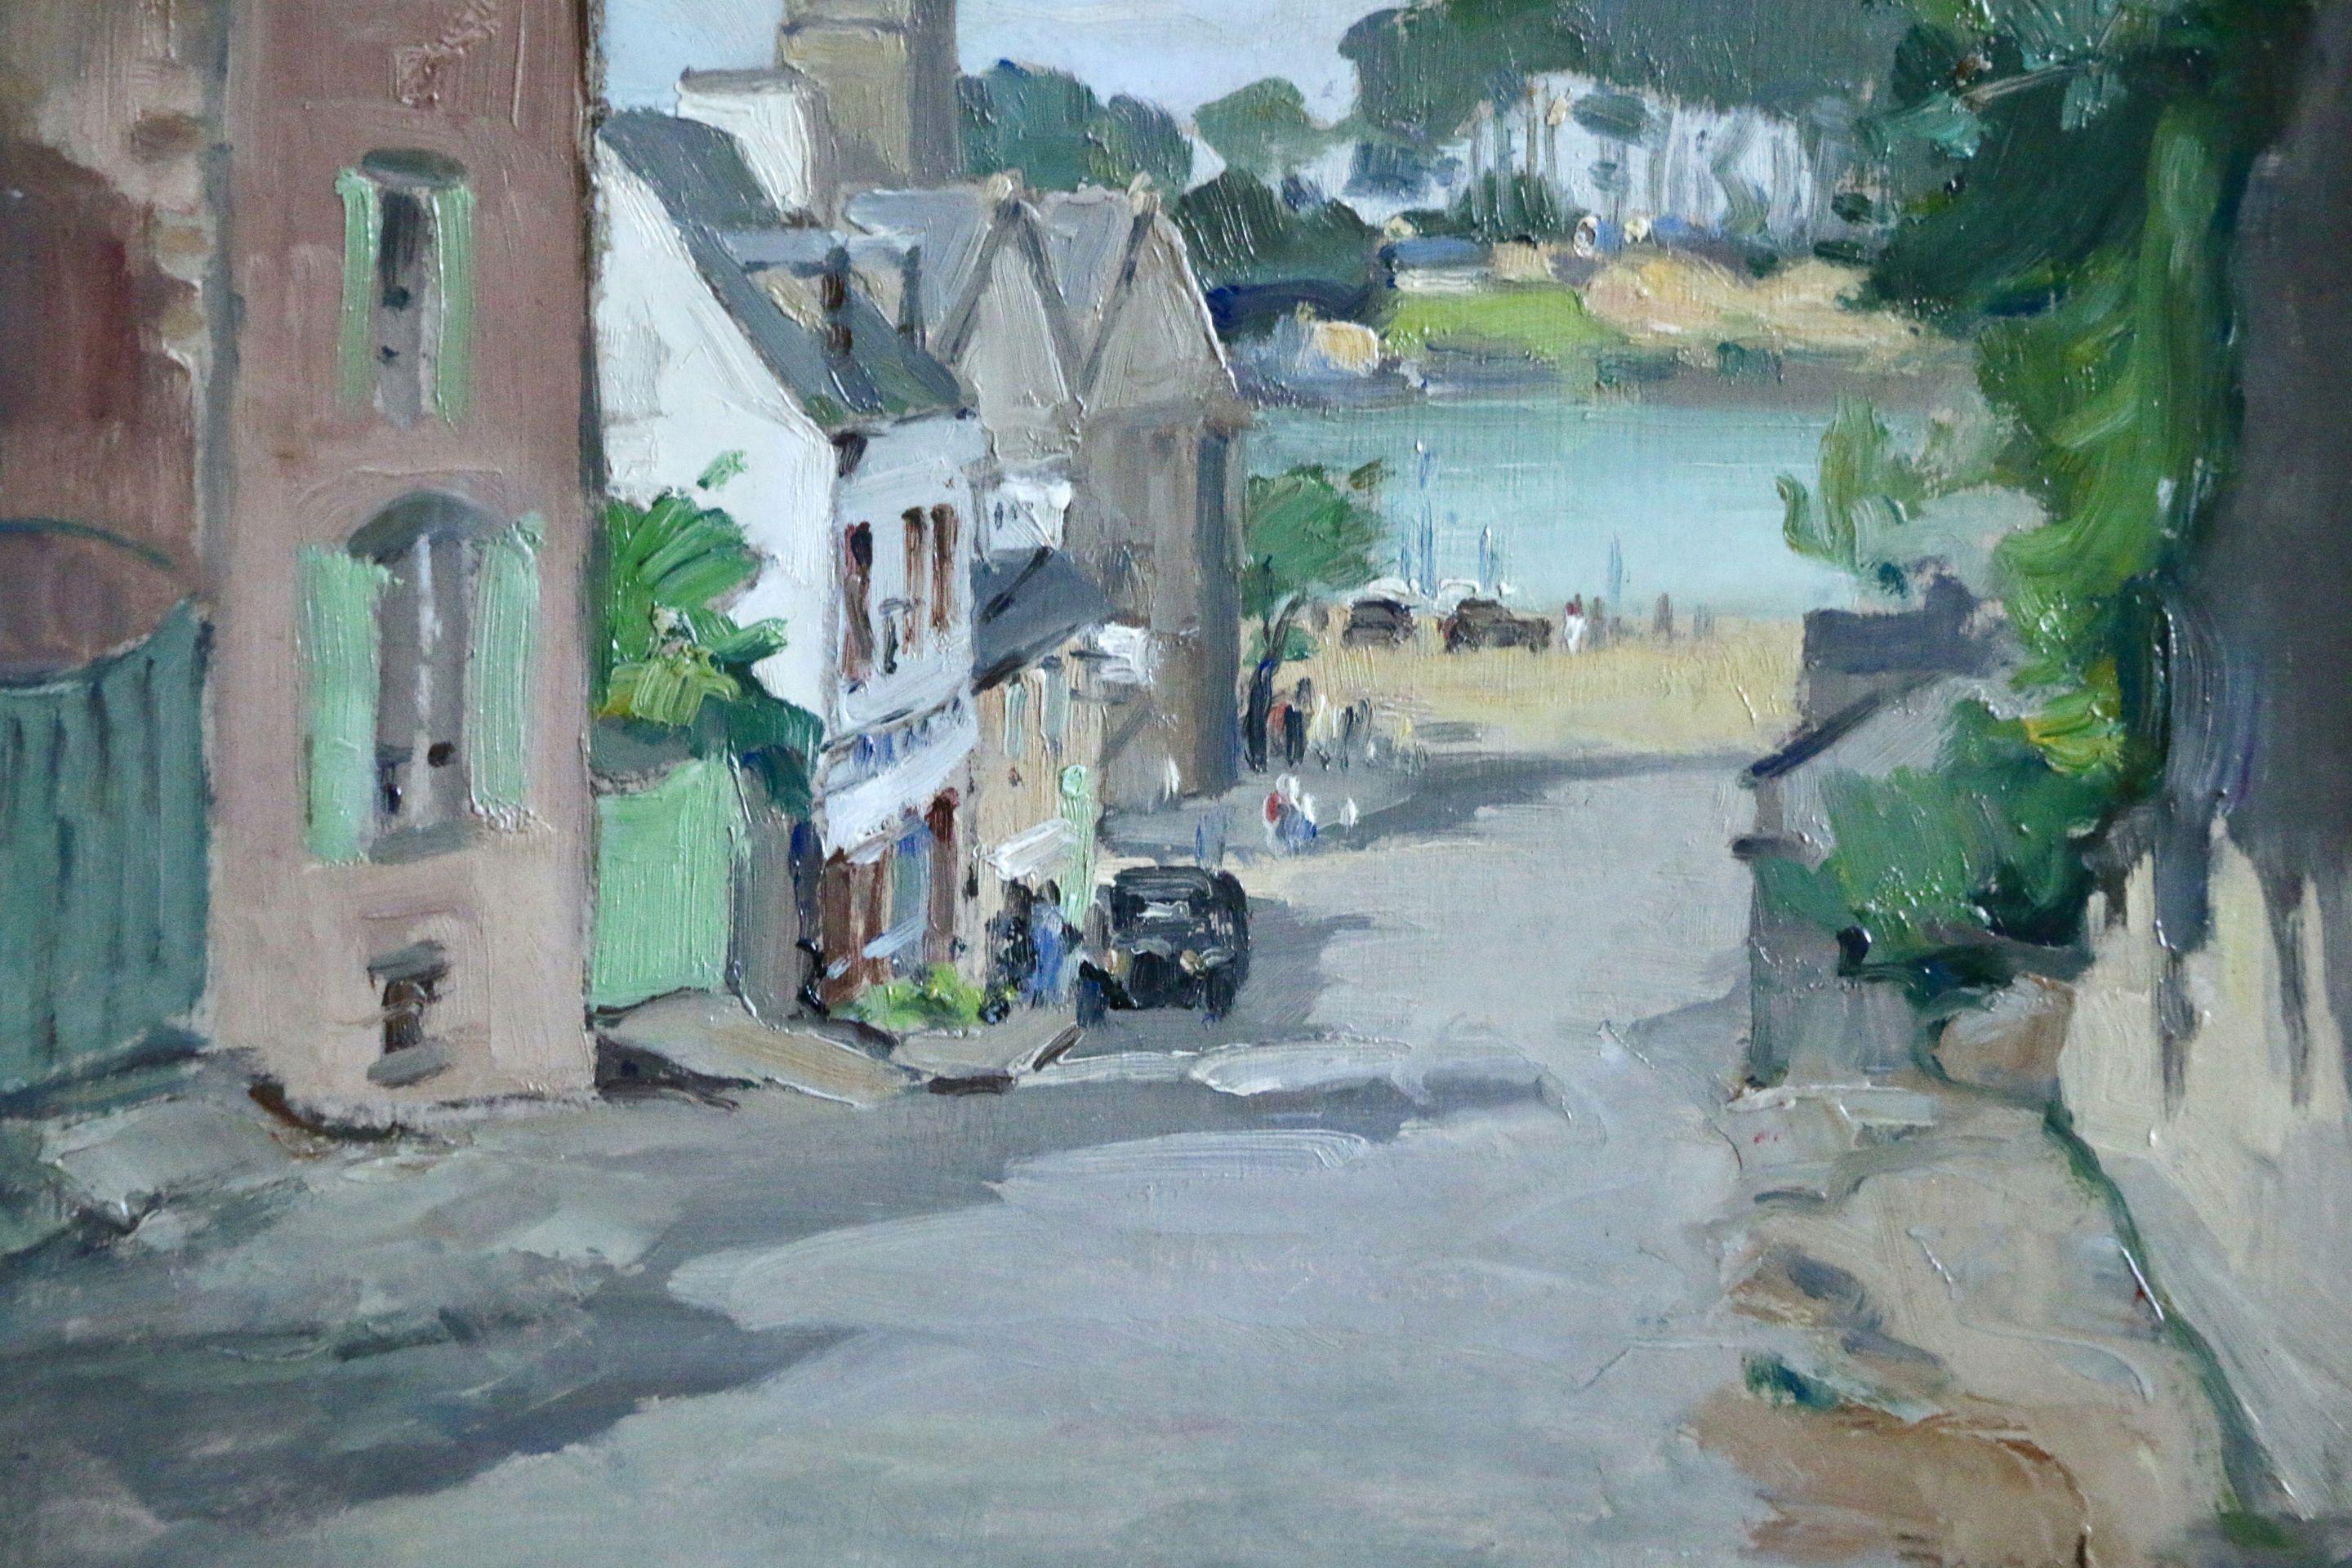 Benodet - Brittany - 20th Century Oil, River in Town Landscape by G C Robin - Post-Impressionist Painting by Georges Charles Robin